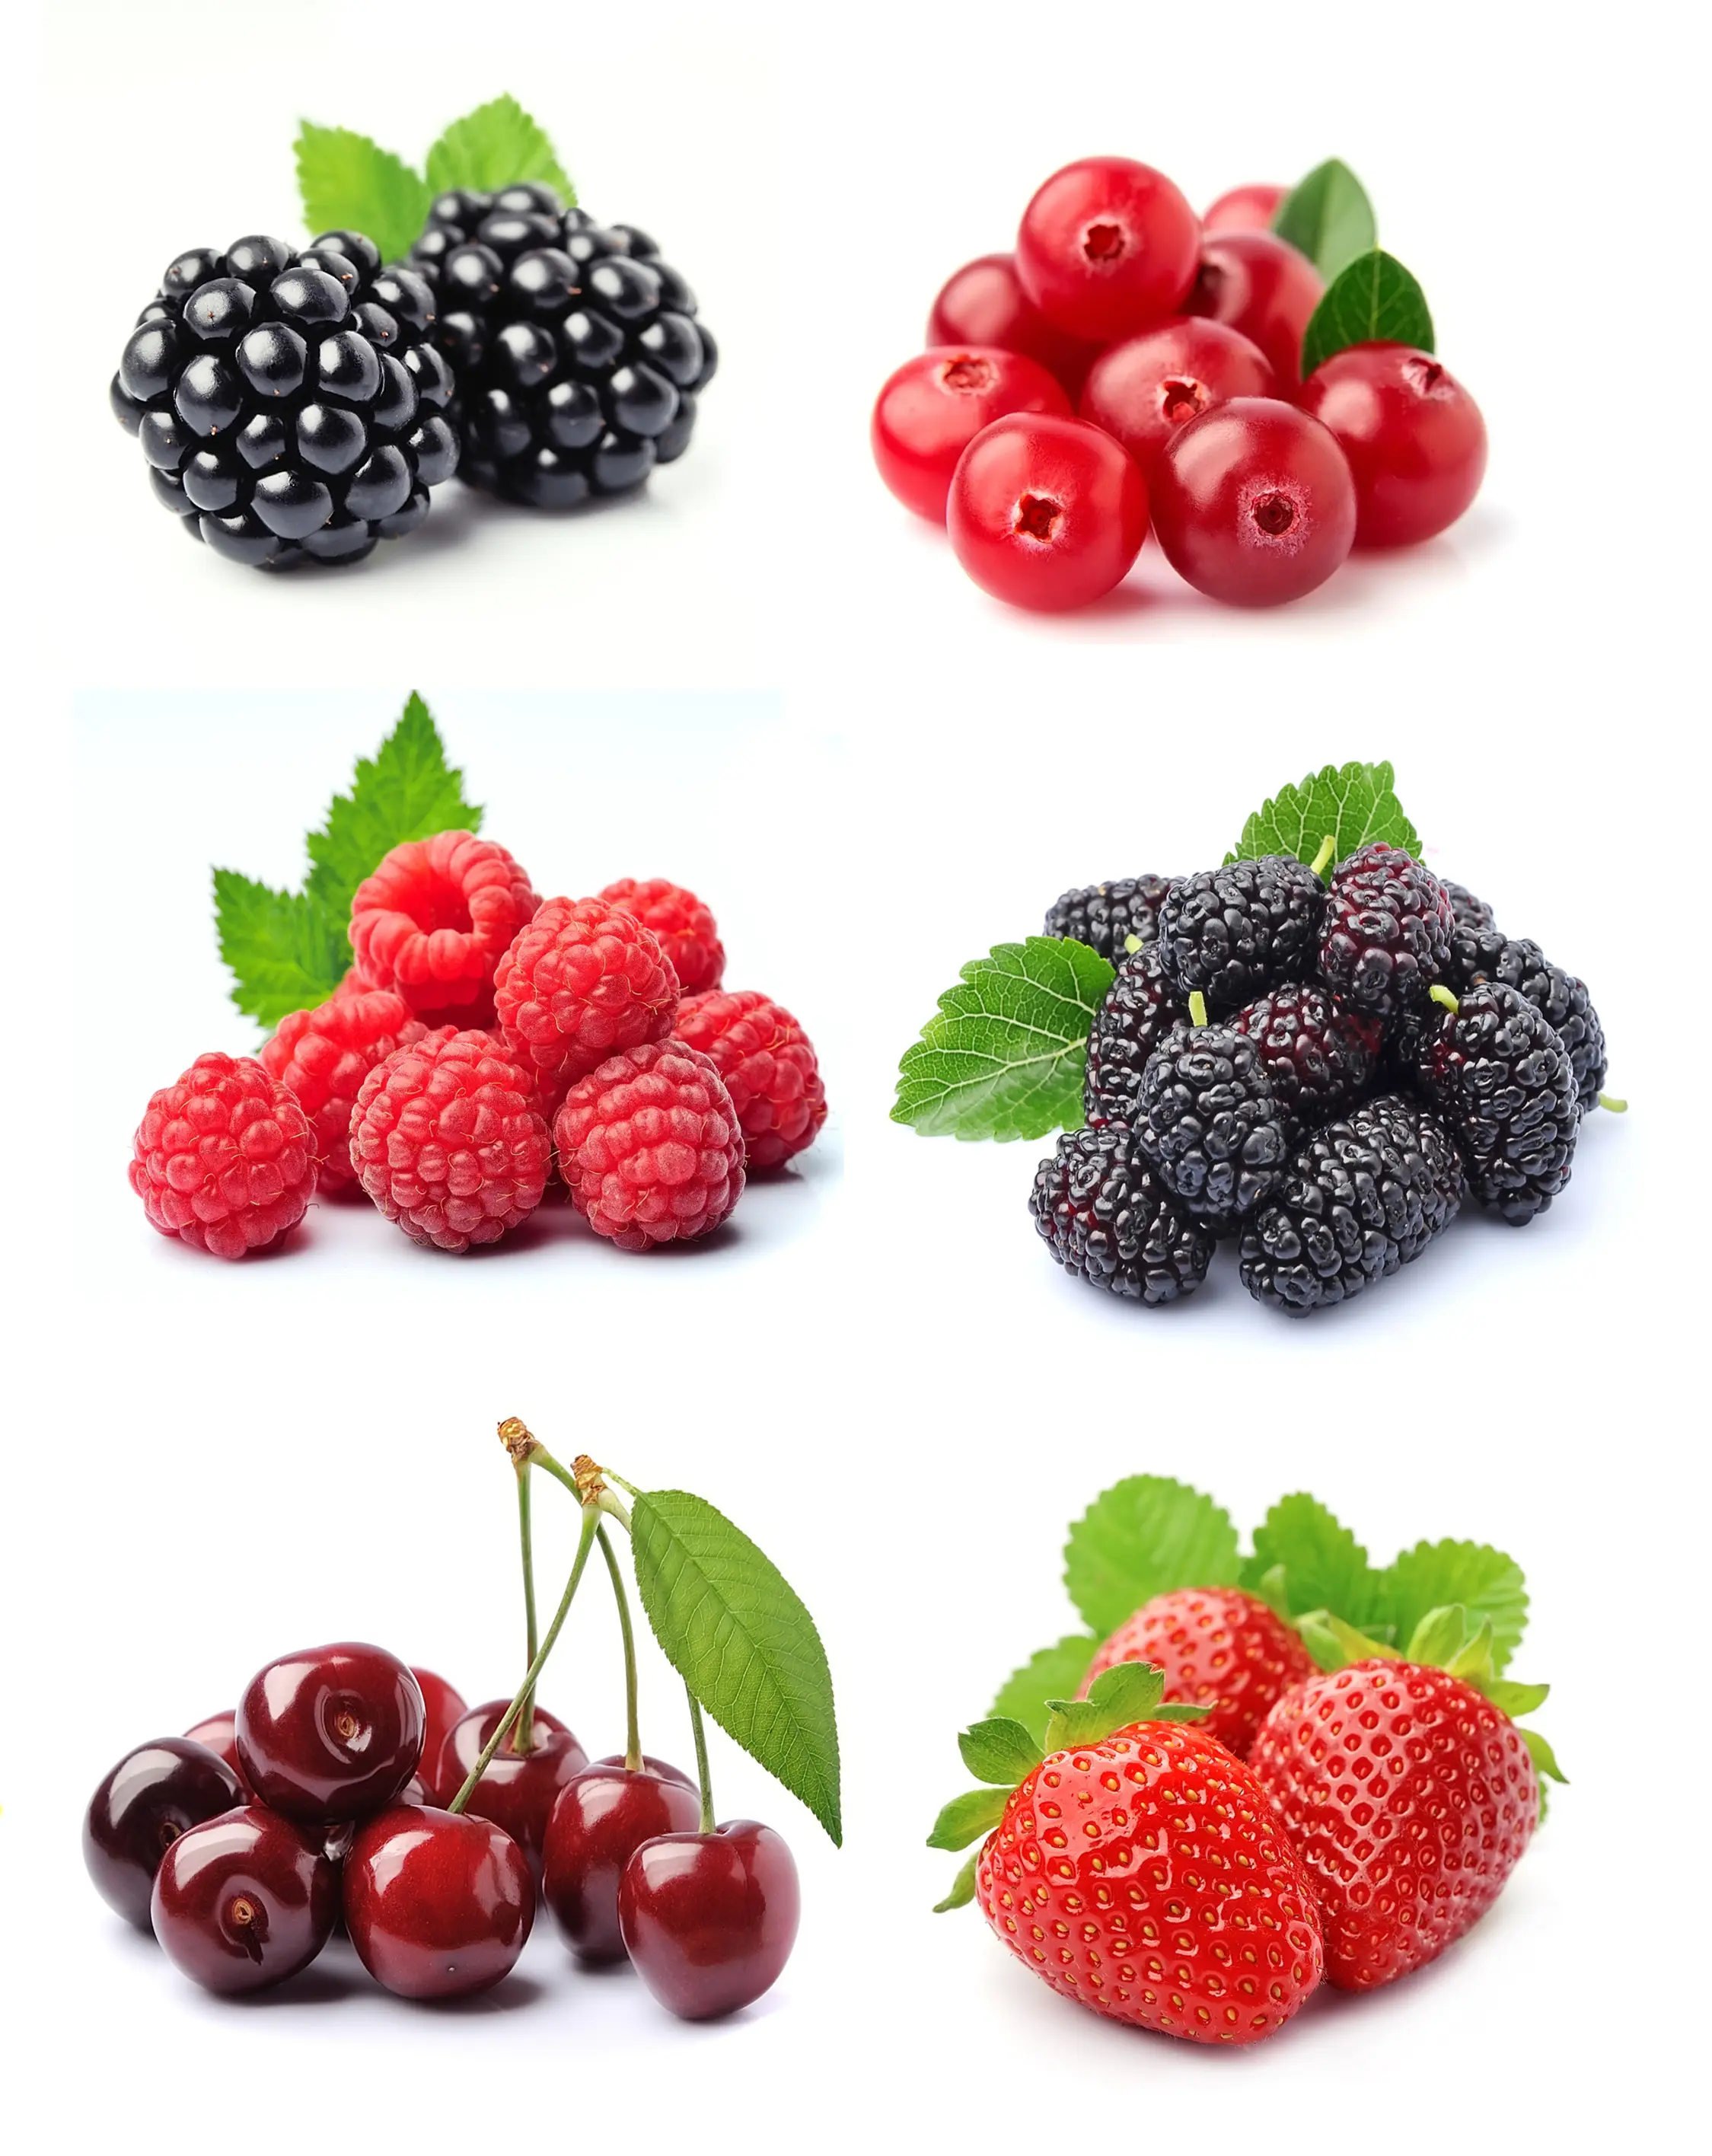 Low carb pantry essential berries & fruit isolated on a bright white background (cherries, blackberries, currents, raspberries, and strawberries) 